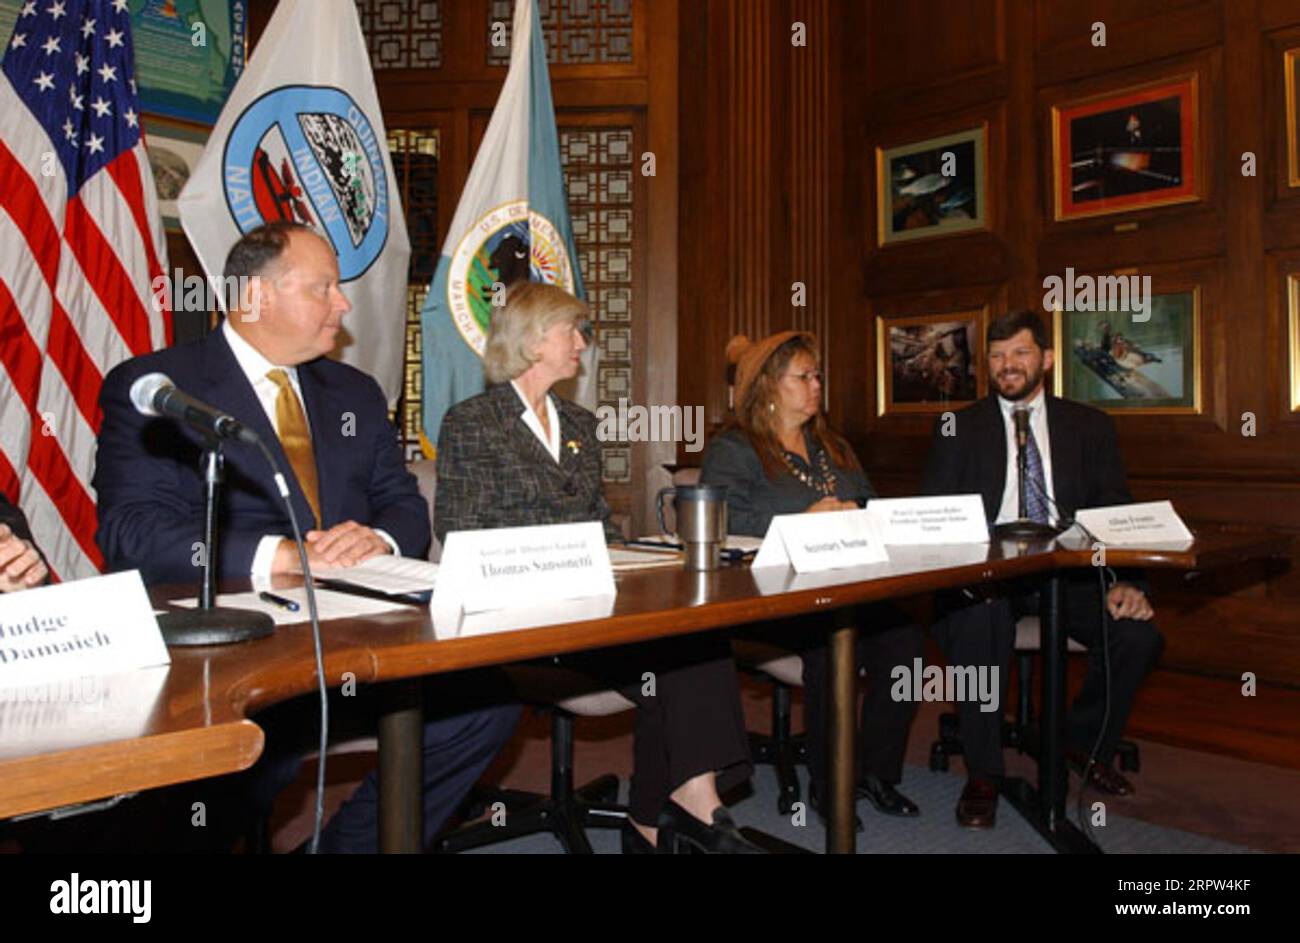 Assistant Attorney General for Environmental and Natural Resources, Thomas Sansonetti, Secretary Gale Norton, President of the Quinault Indian Nation, Pearl Capoeman-Baller, and Vice President of the Trust for Public Land, Alan Front, left to right, at signing event for forest habitat protection agreement Stock Photo